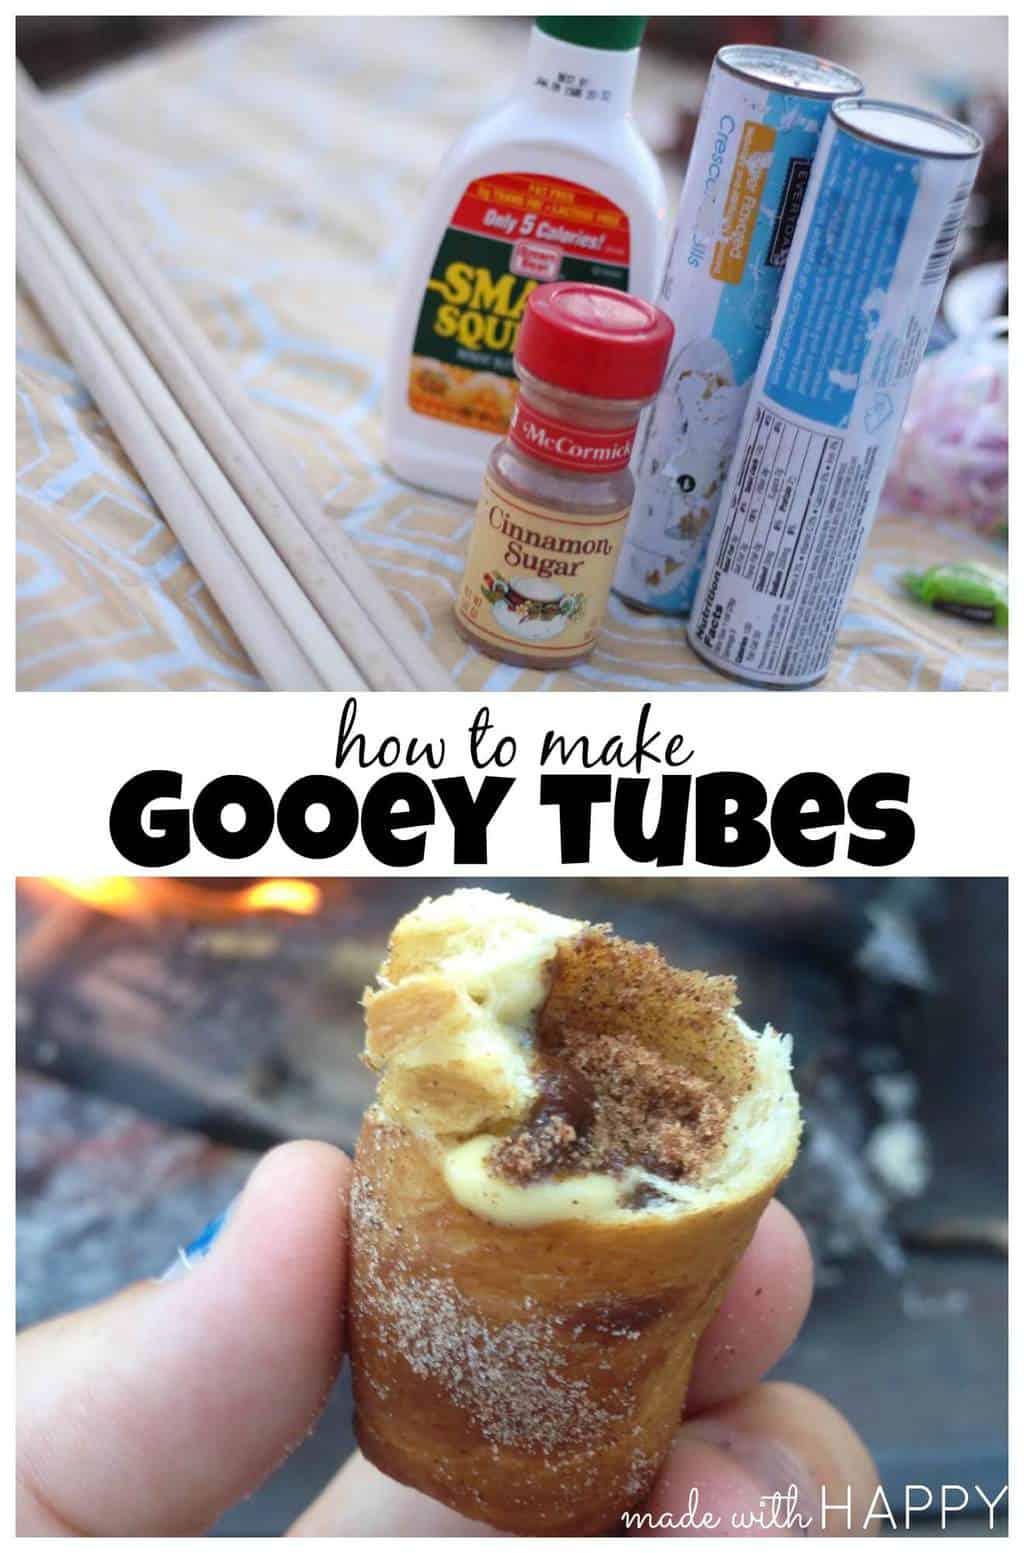 How to make gooey tubes